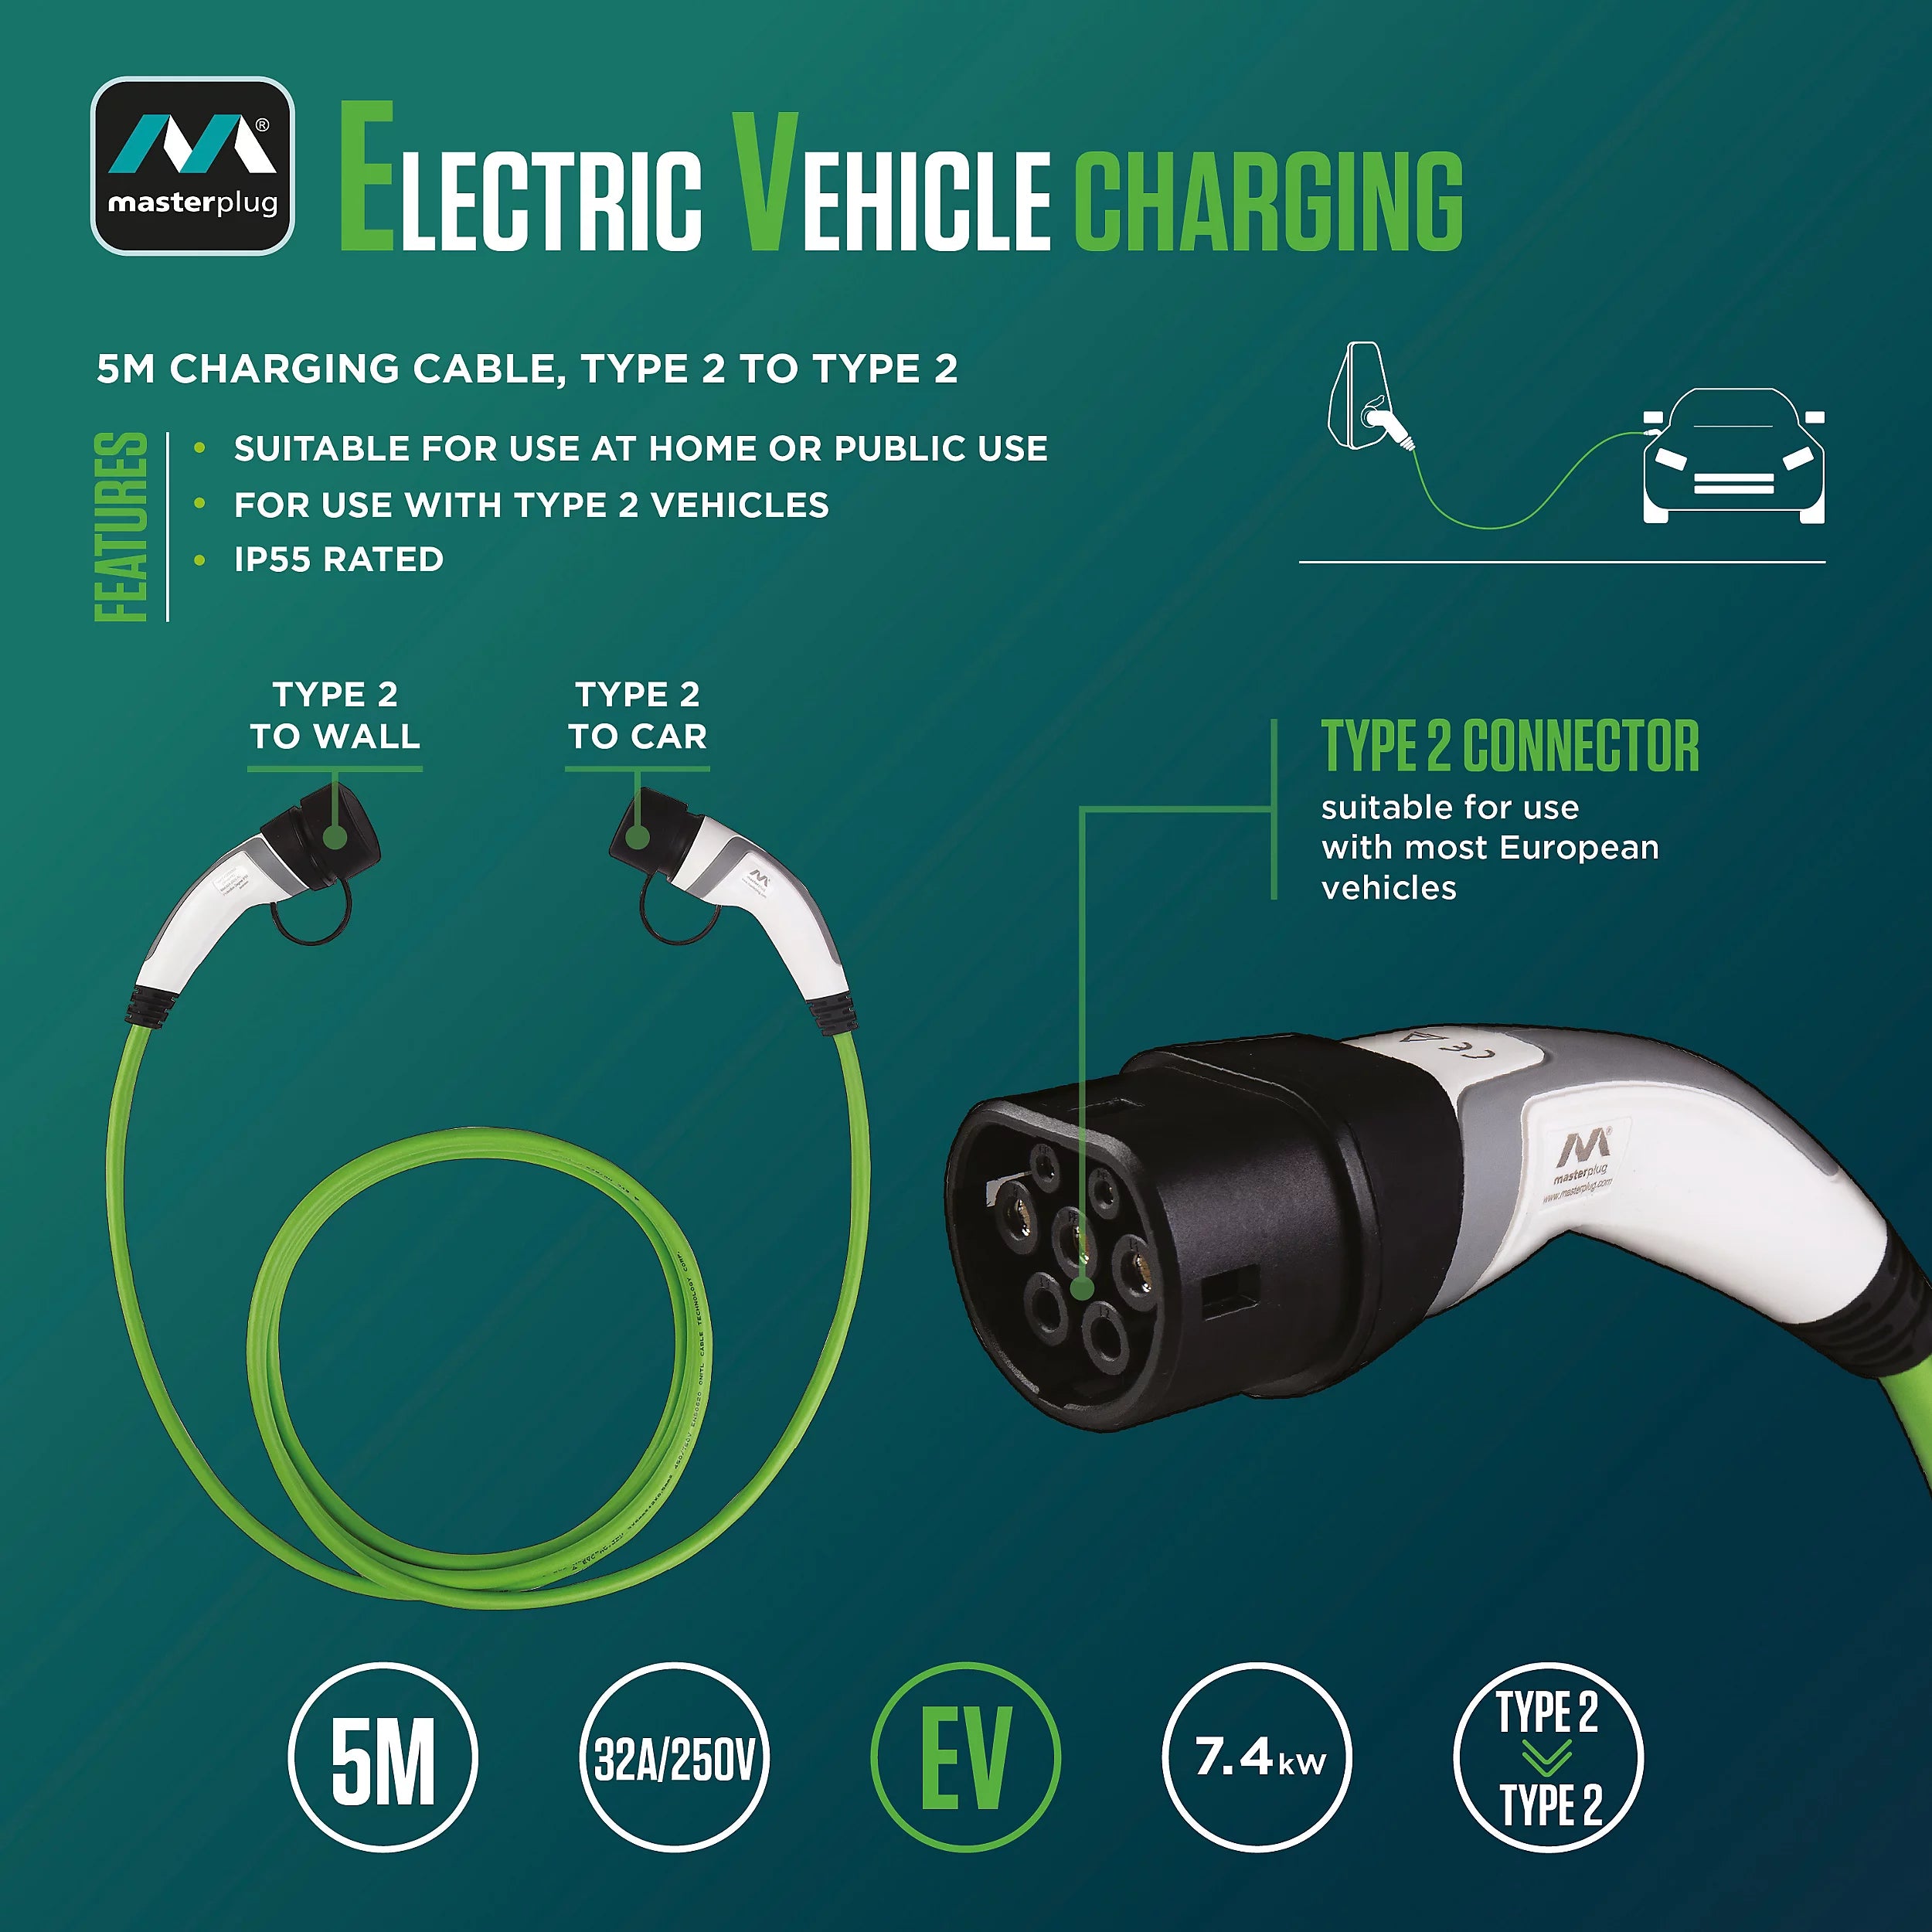 Masterplug-Electrical vehicle charging cable-8820